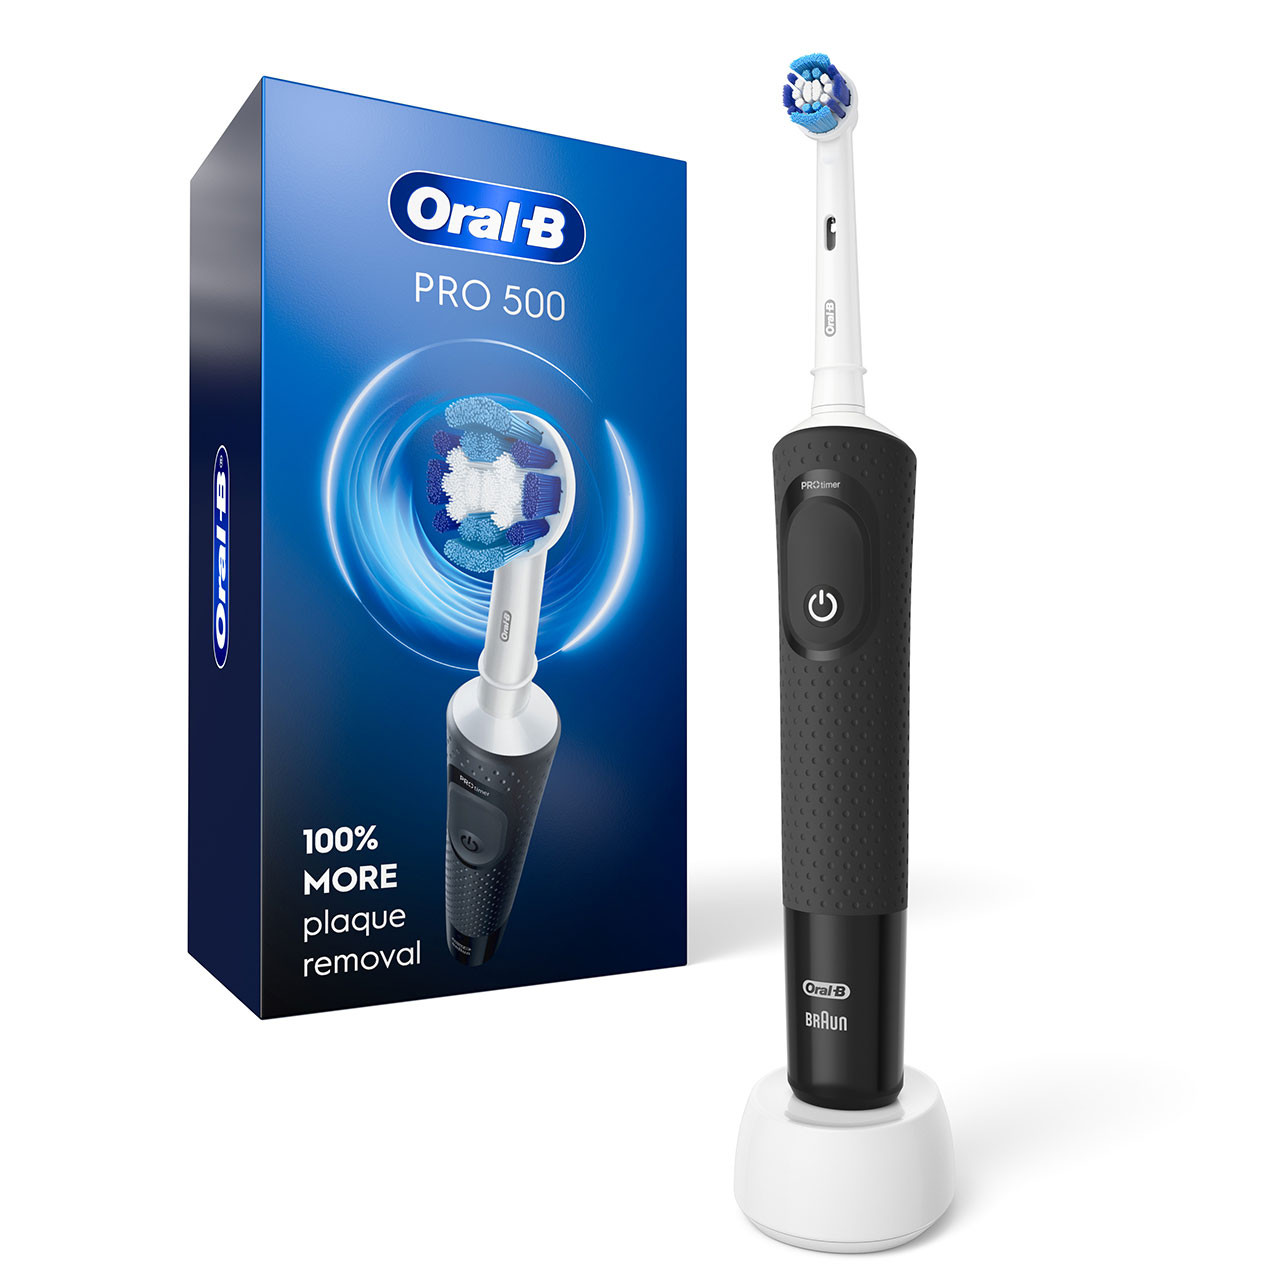 Oral-B 7000 specifications